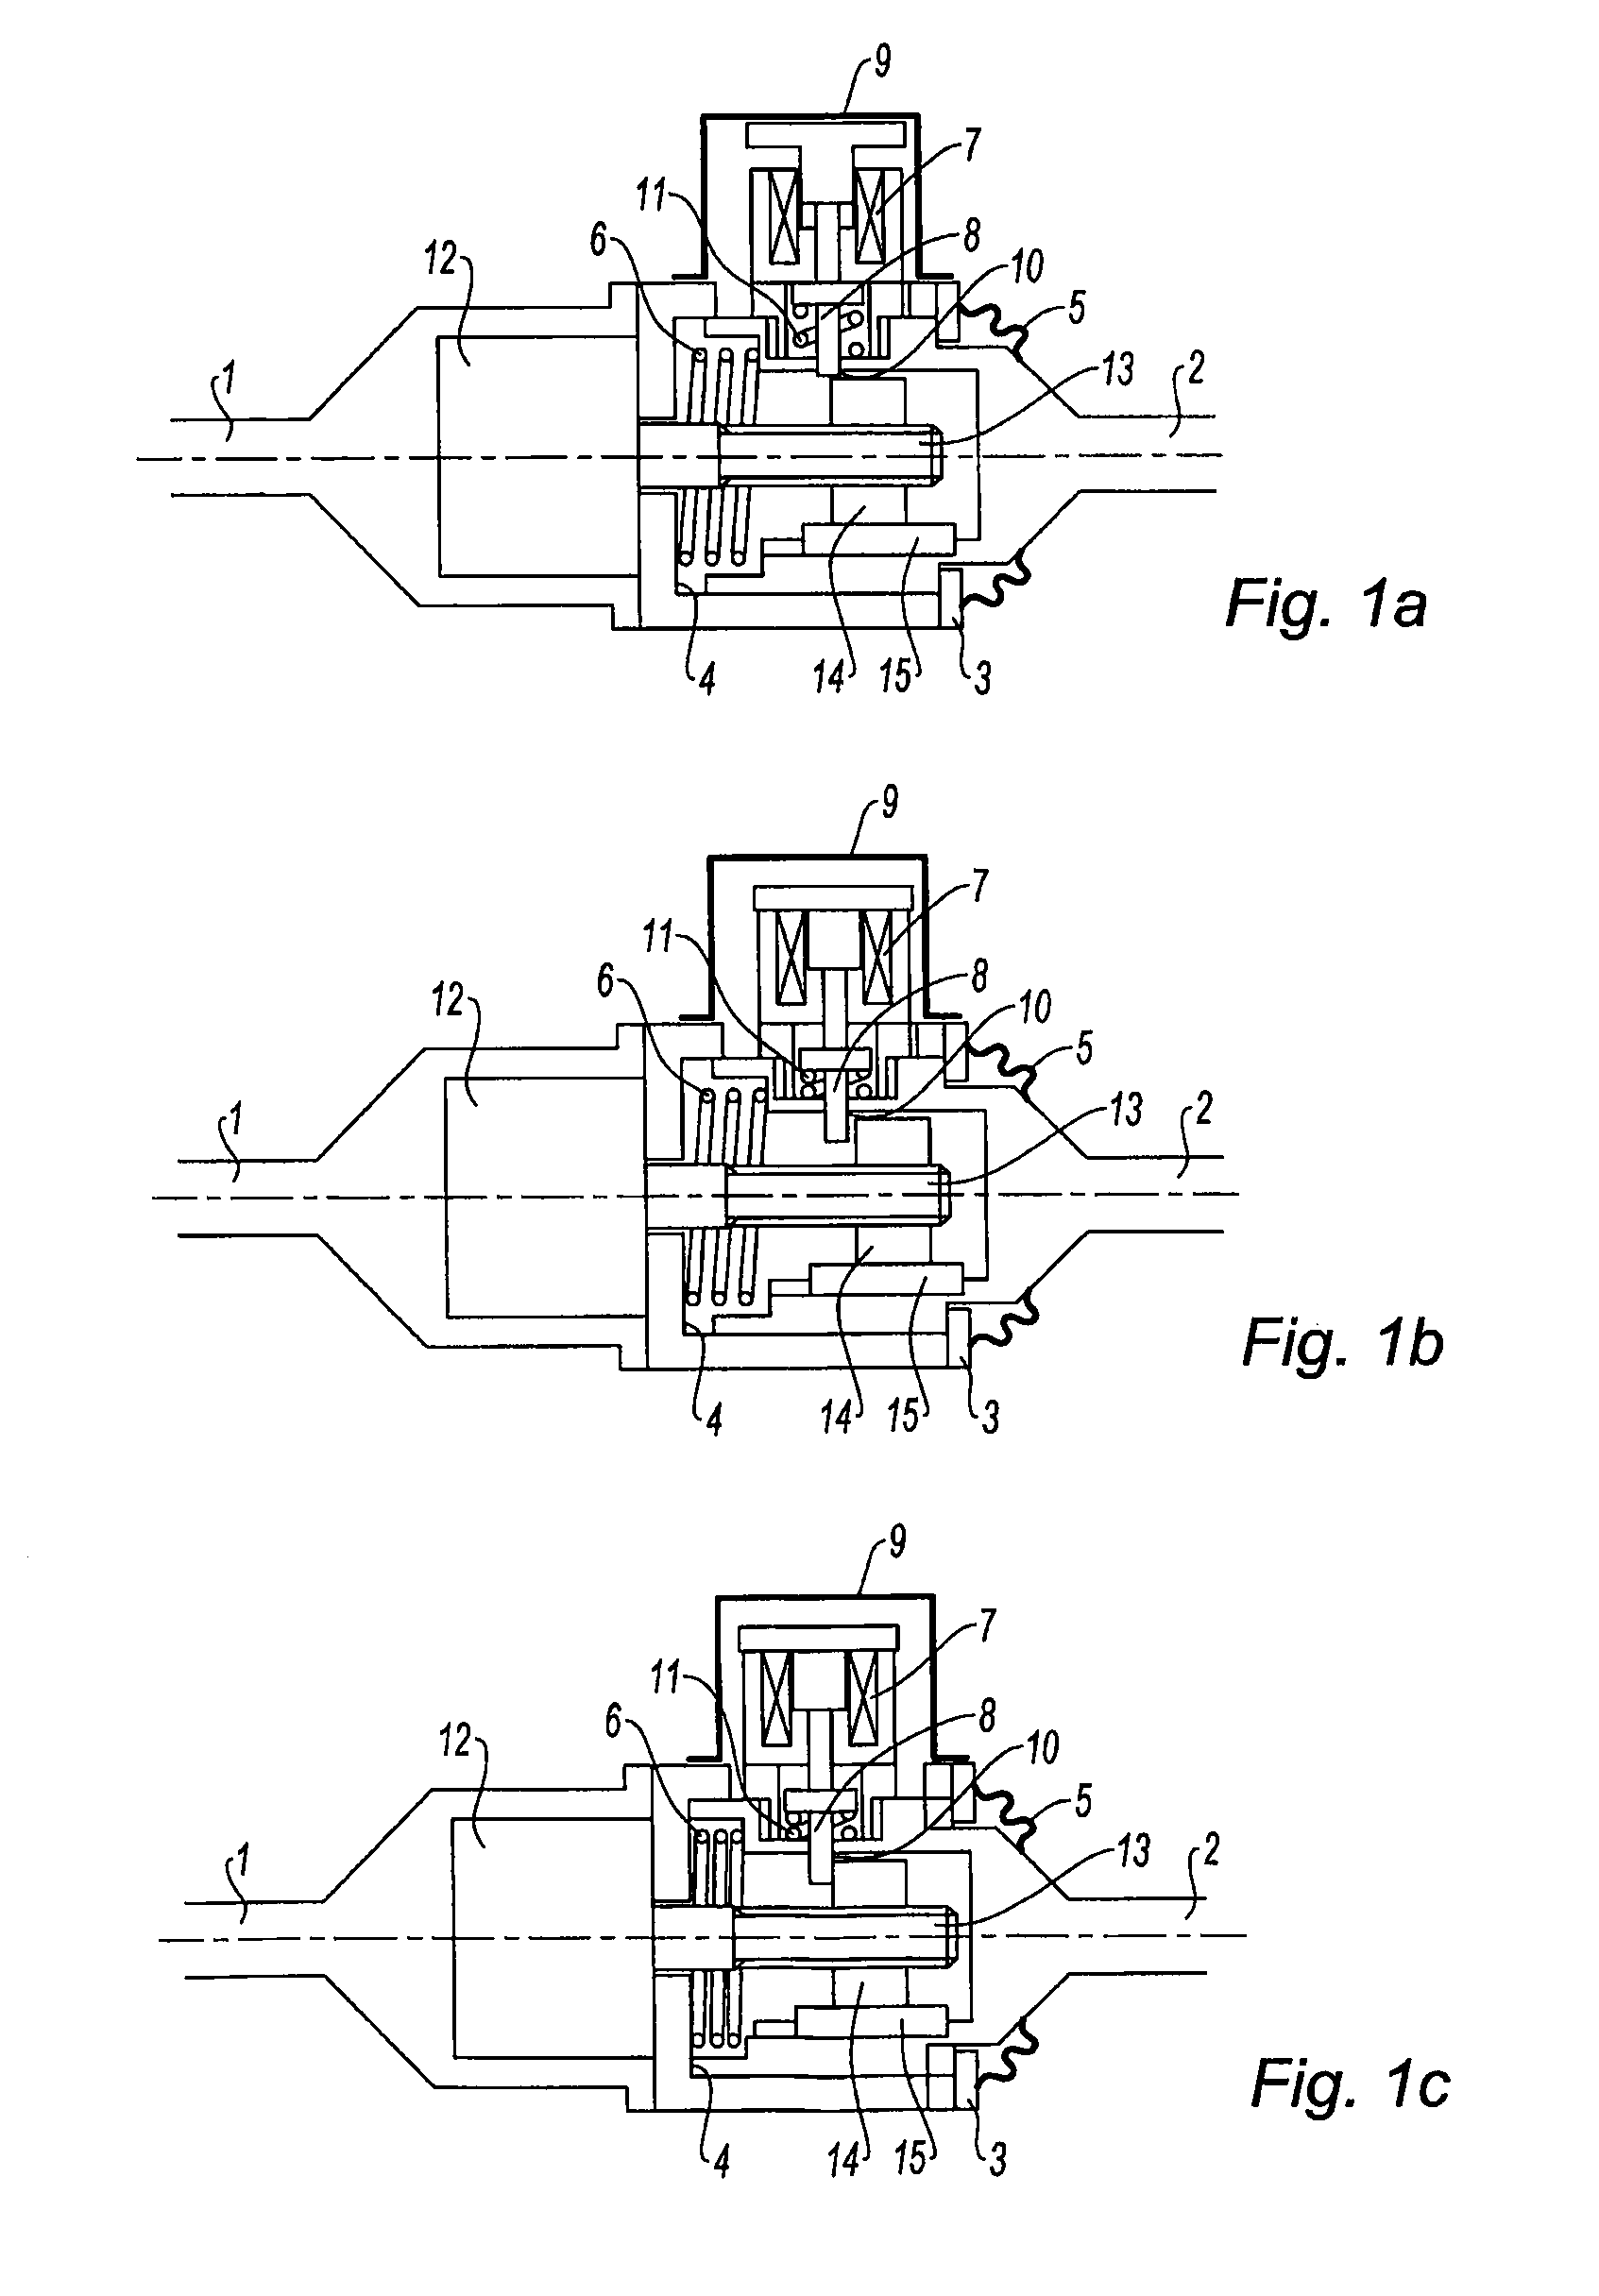 Motor Vehicle Wheel Mounting Comprising A Binary Actuator For Adjusting The Angular Position of The Plane of A Wheel